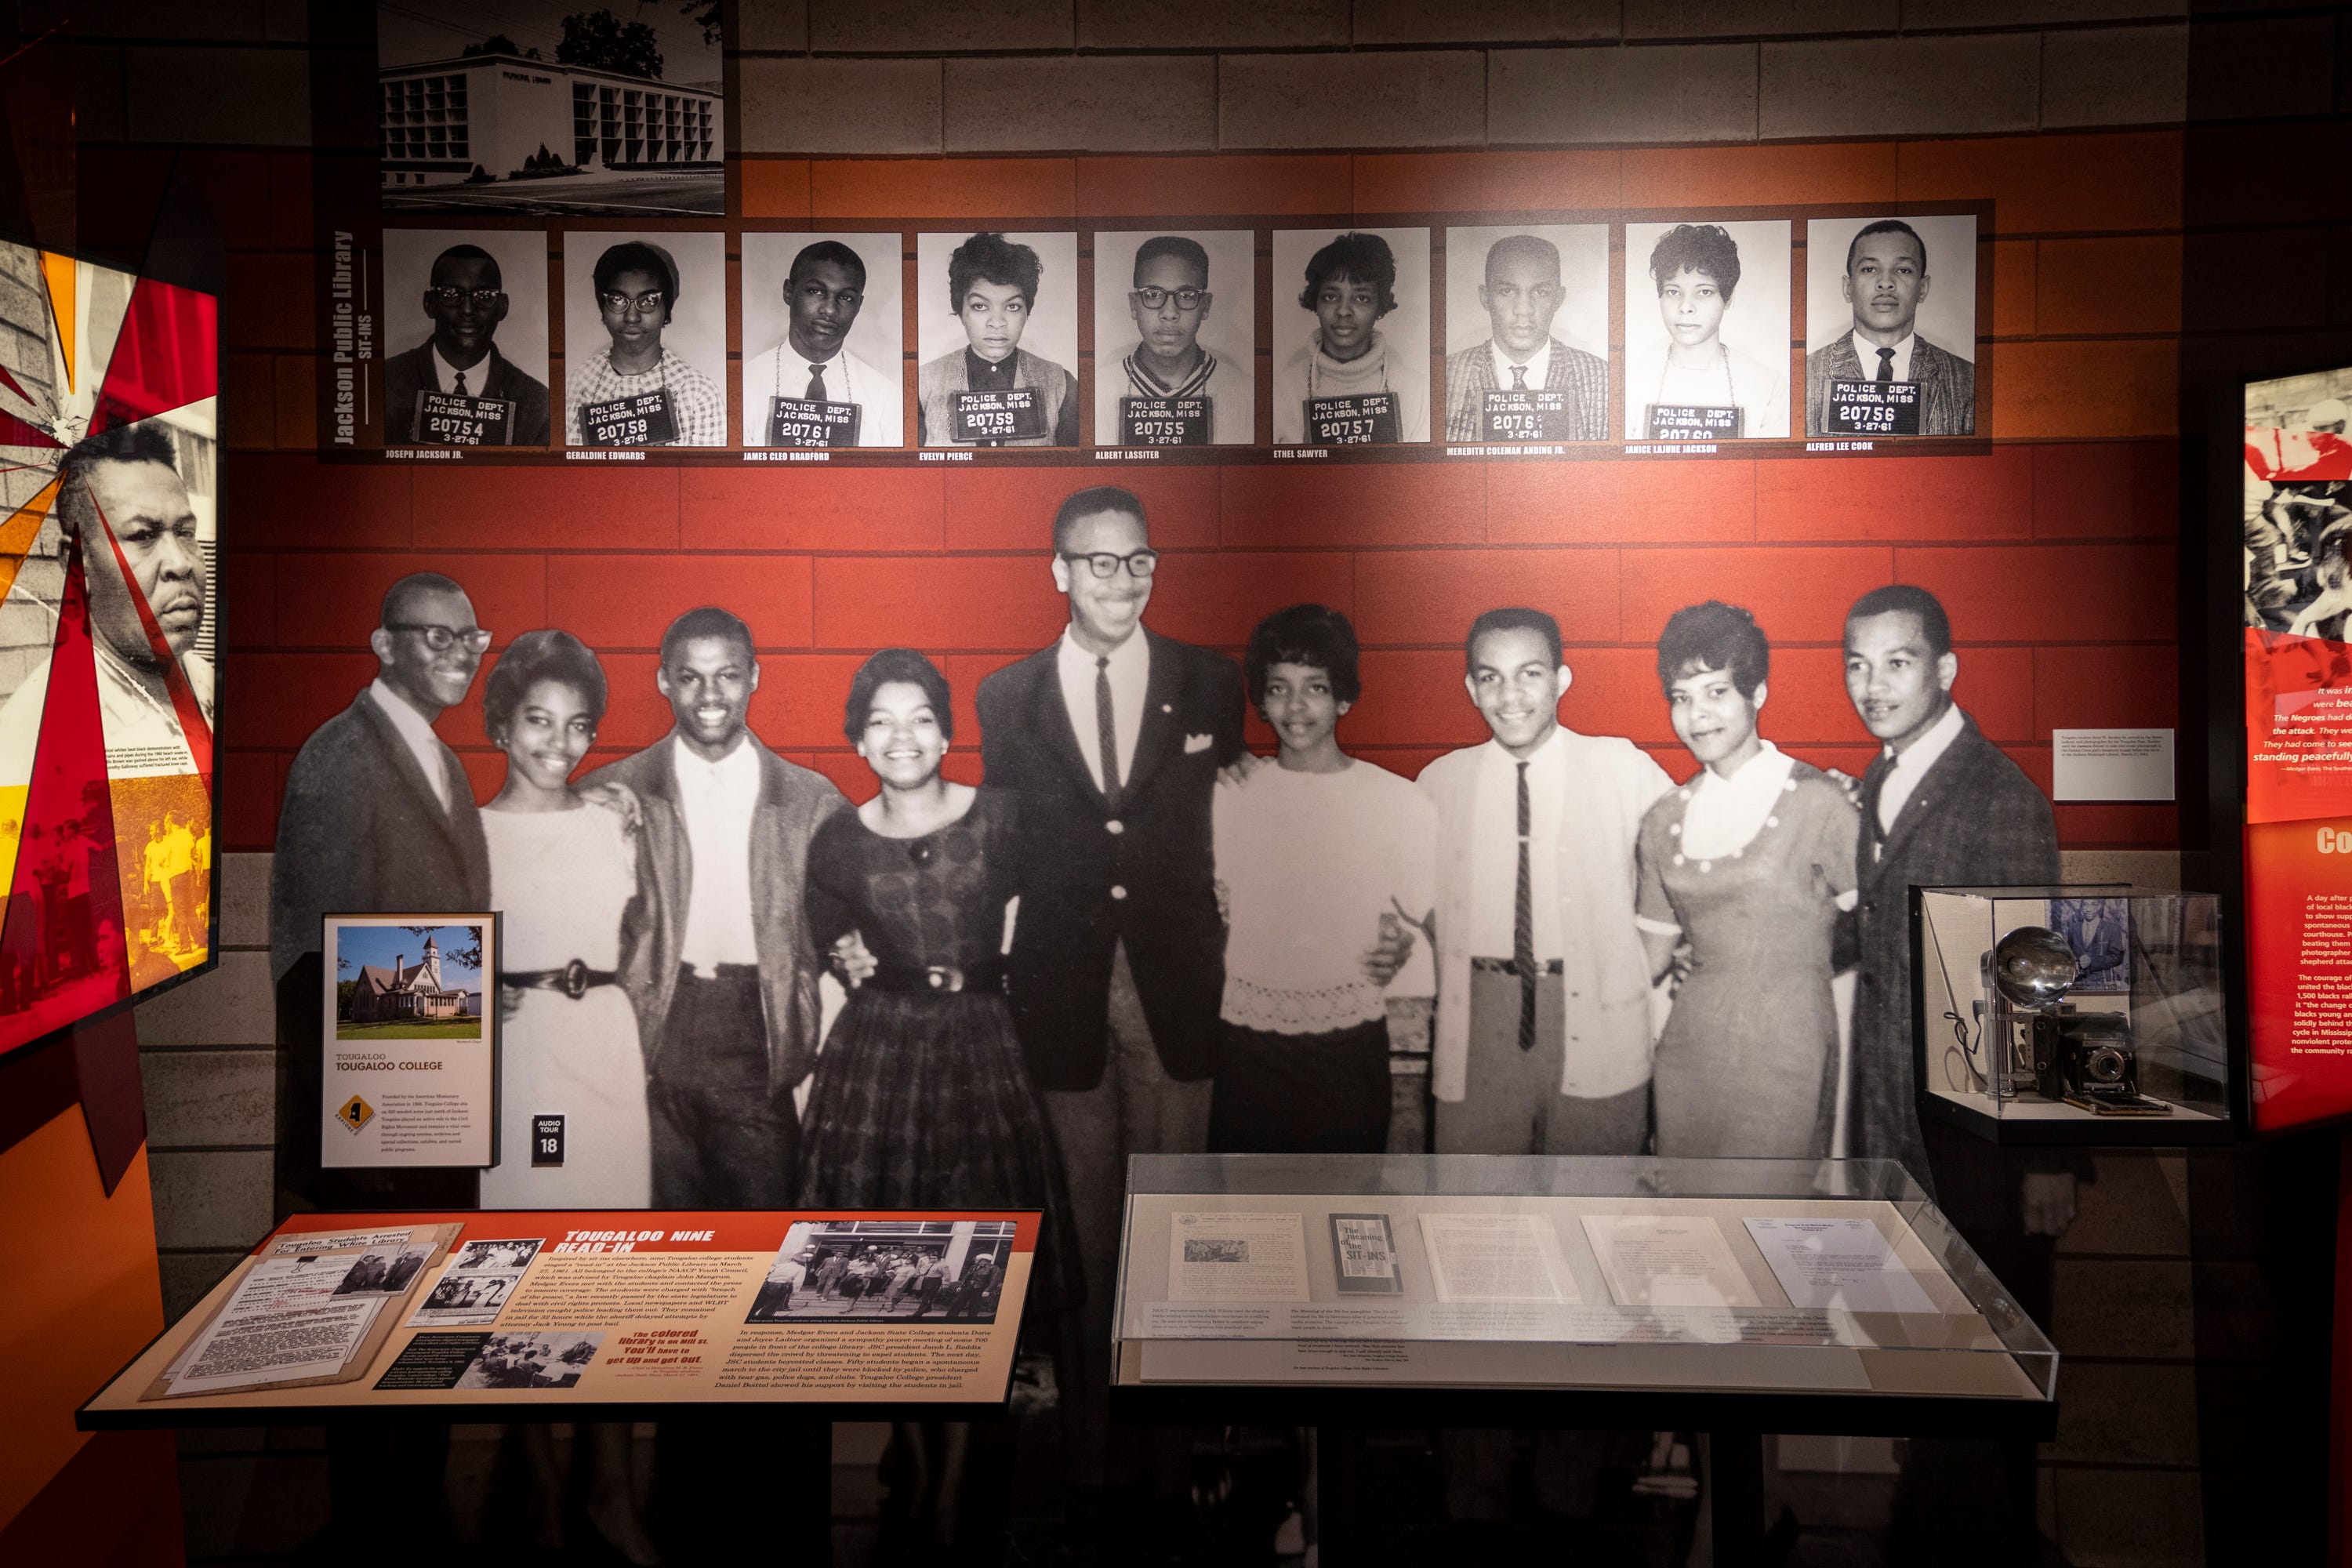 The Tougaloo Nine are remembered in an exhibit at the Mississippi Civil Rights Museum in Jackson, Miss.